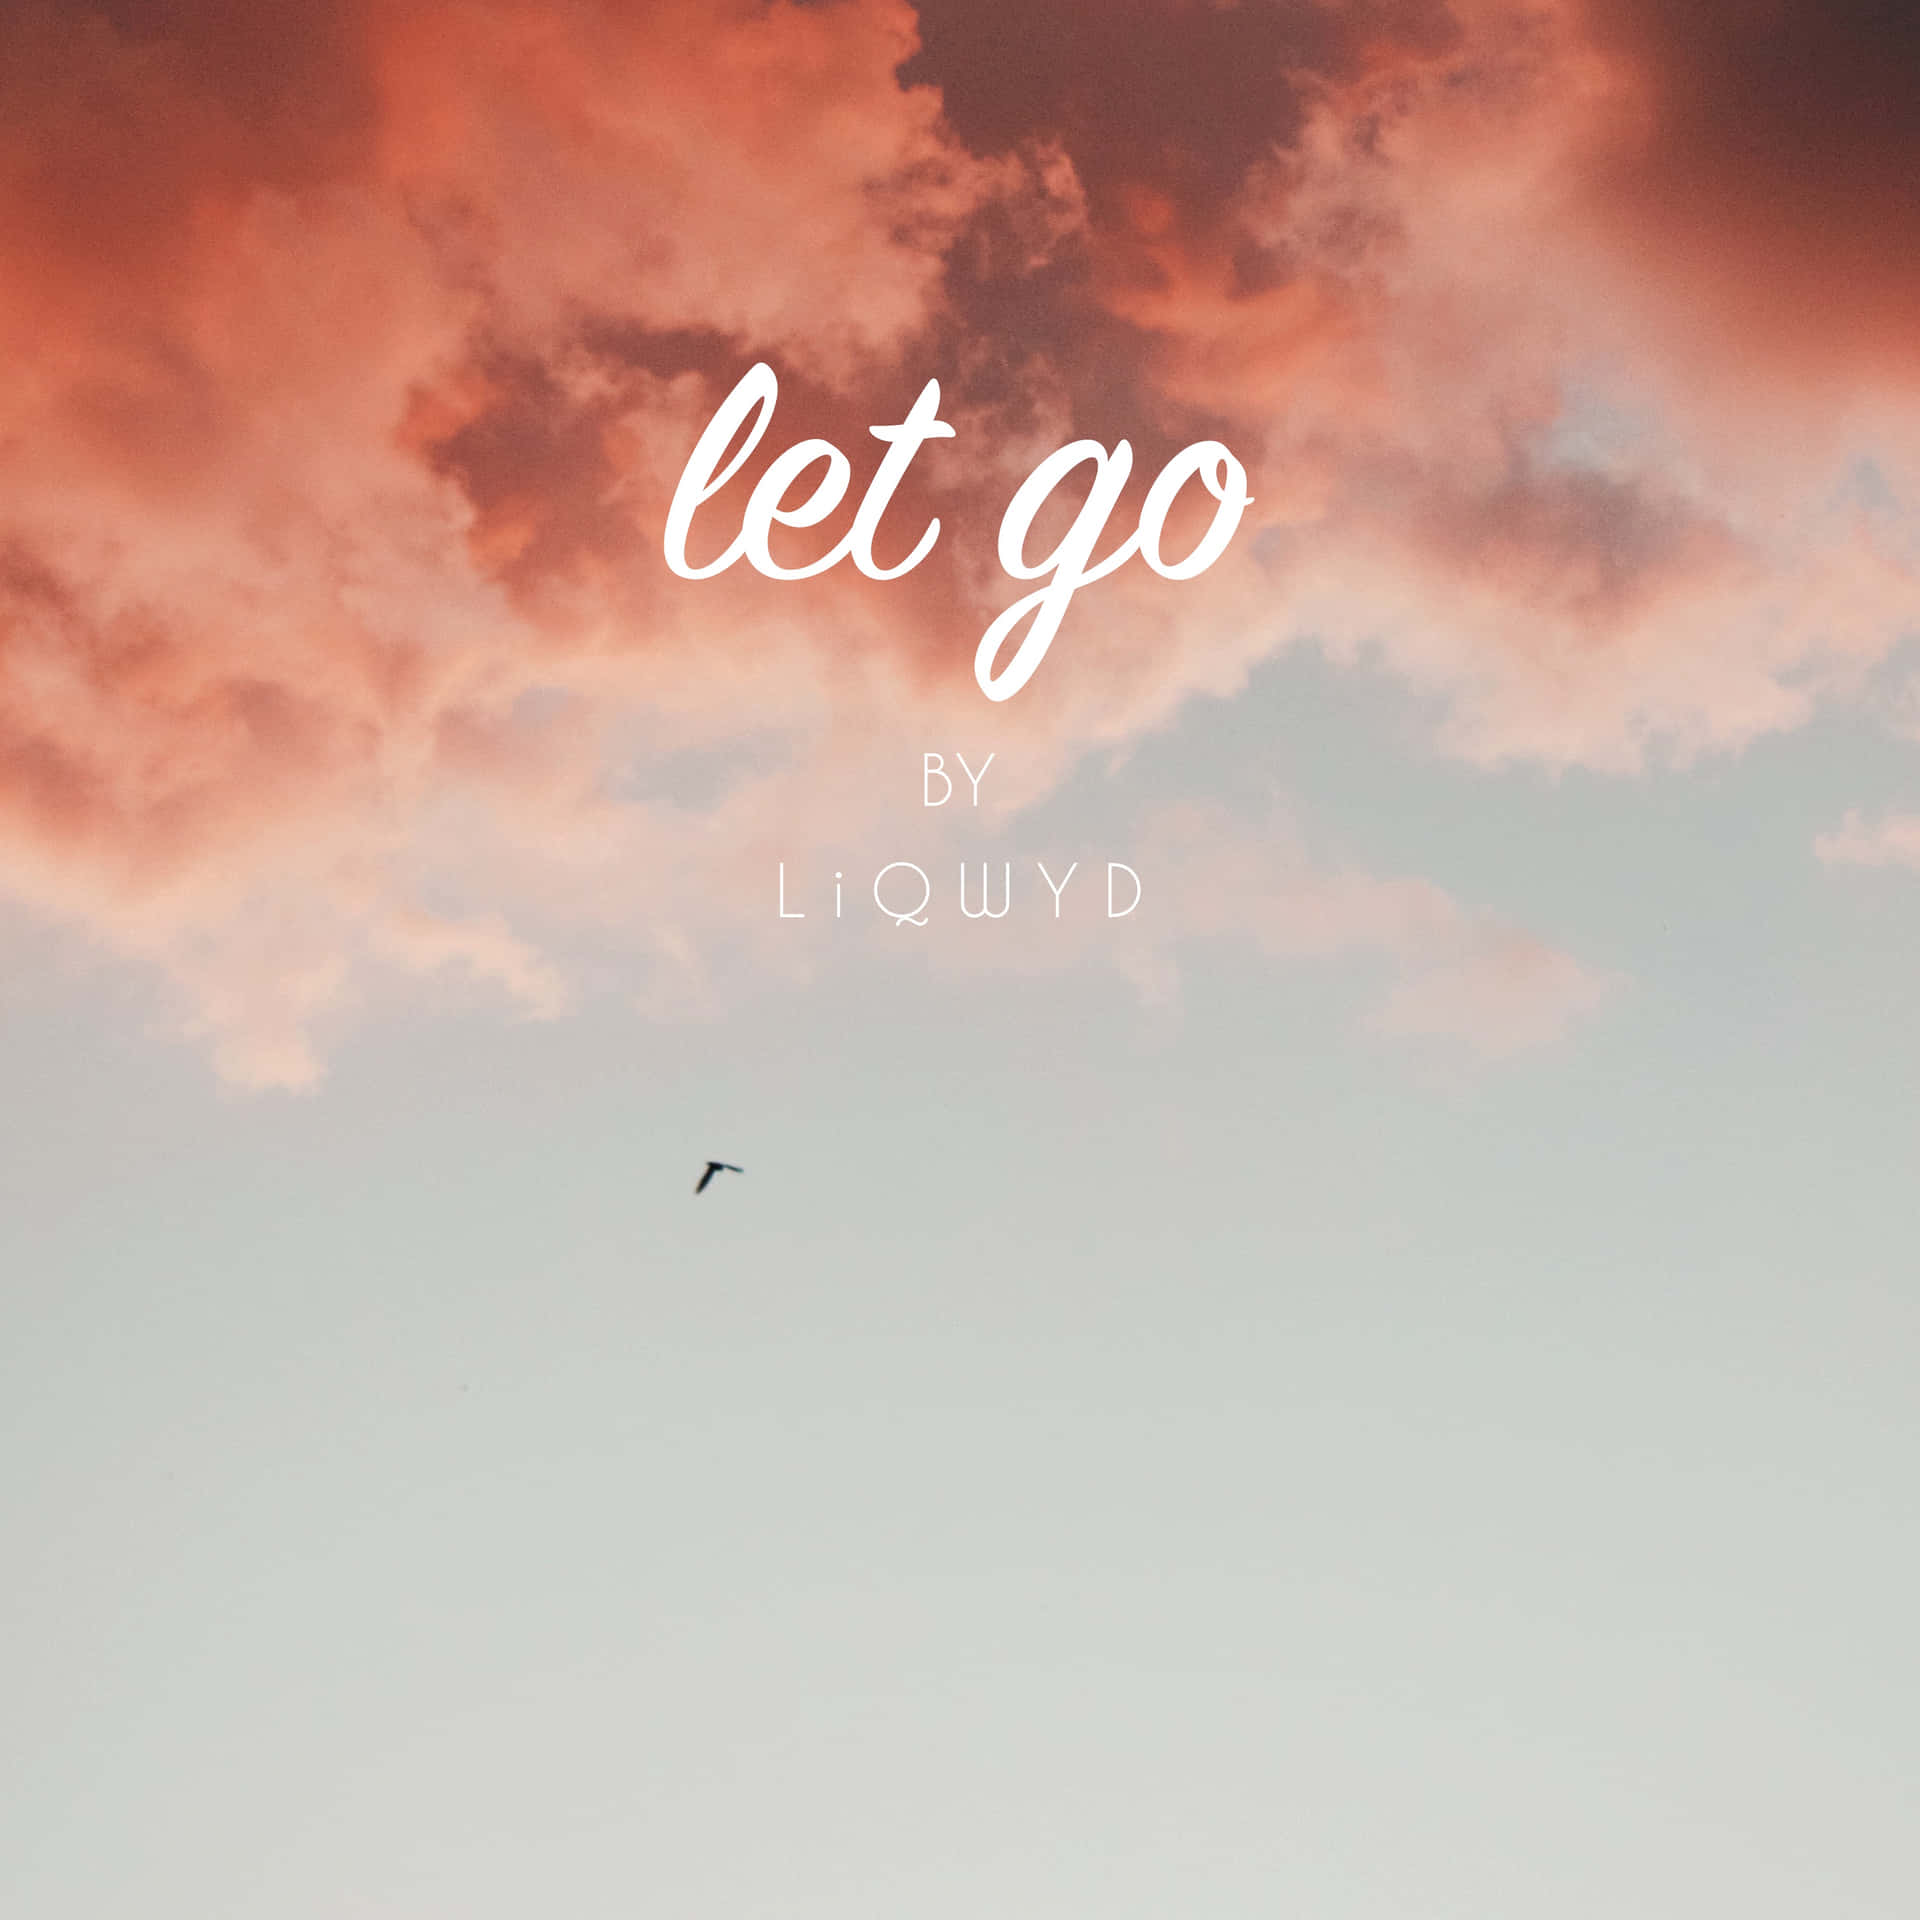 Let go  Go wallpaper Photo background images Wallpaper quotes